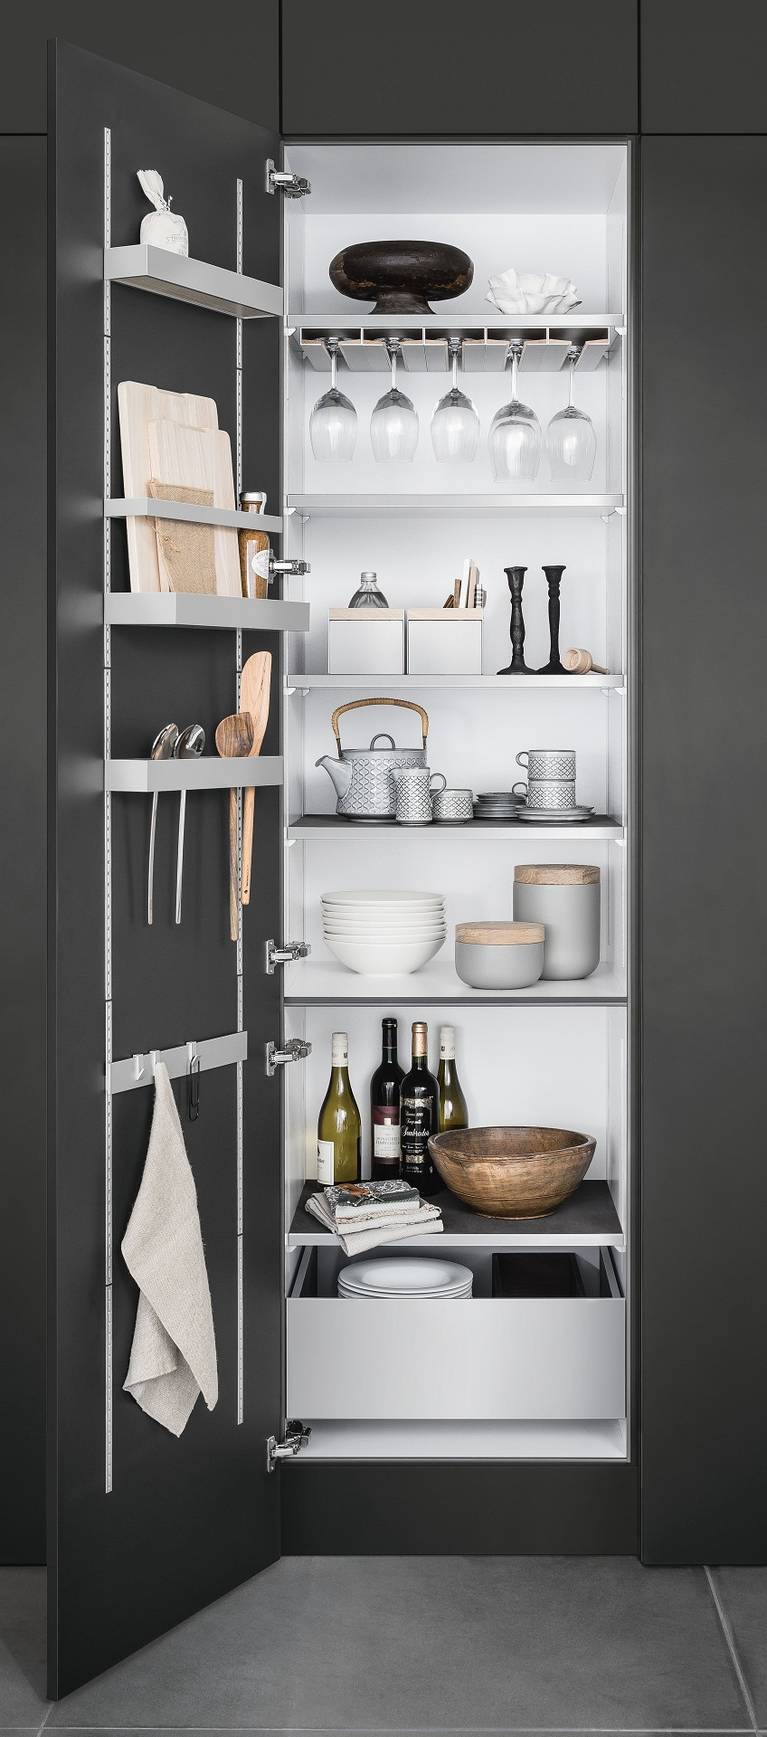 SieMatic MultiMatic interior organization system for tall cabinets offers more storage space in the kitchen.